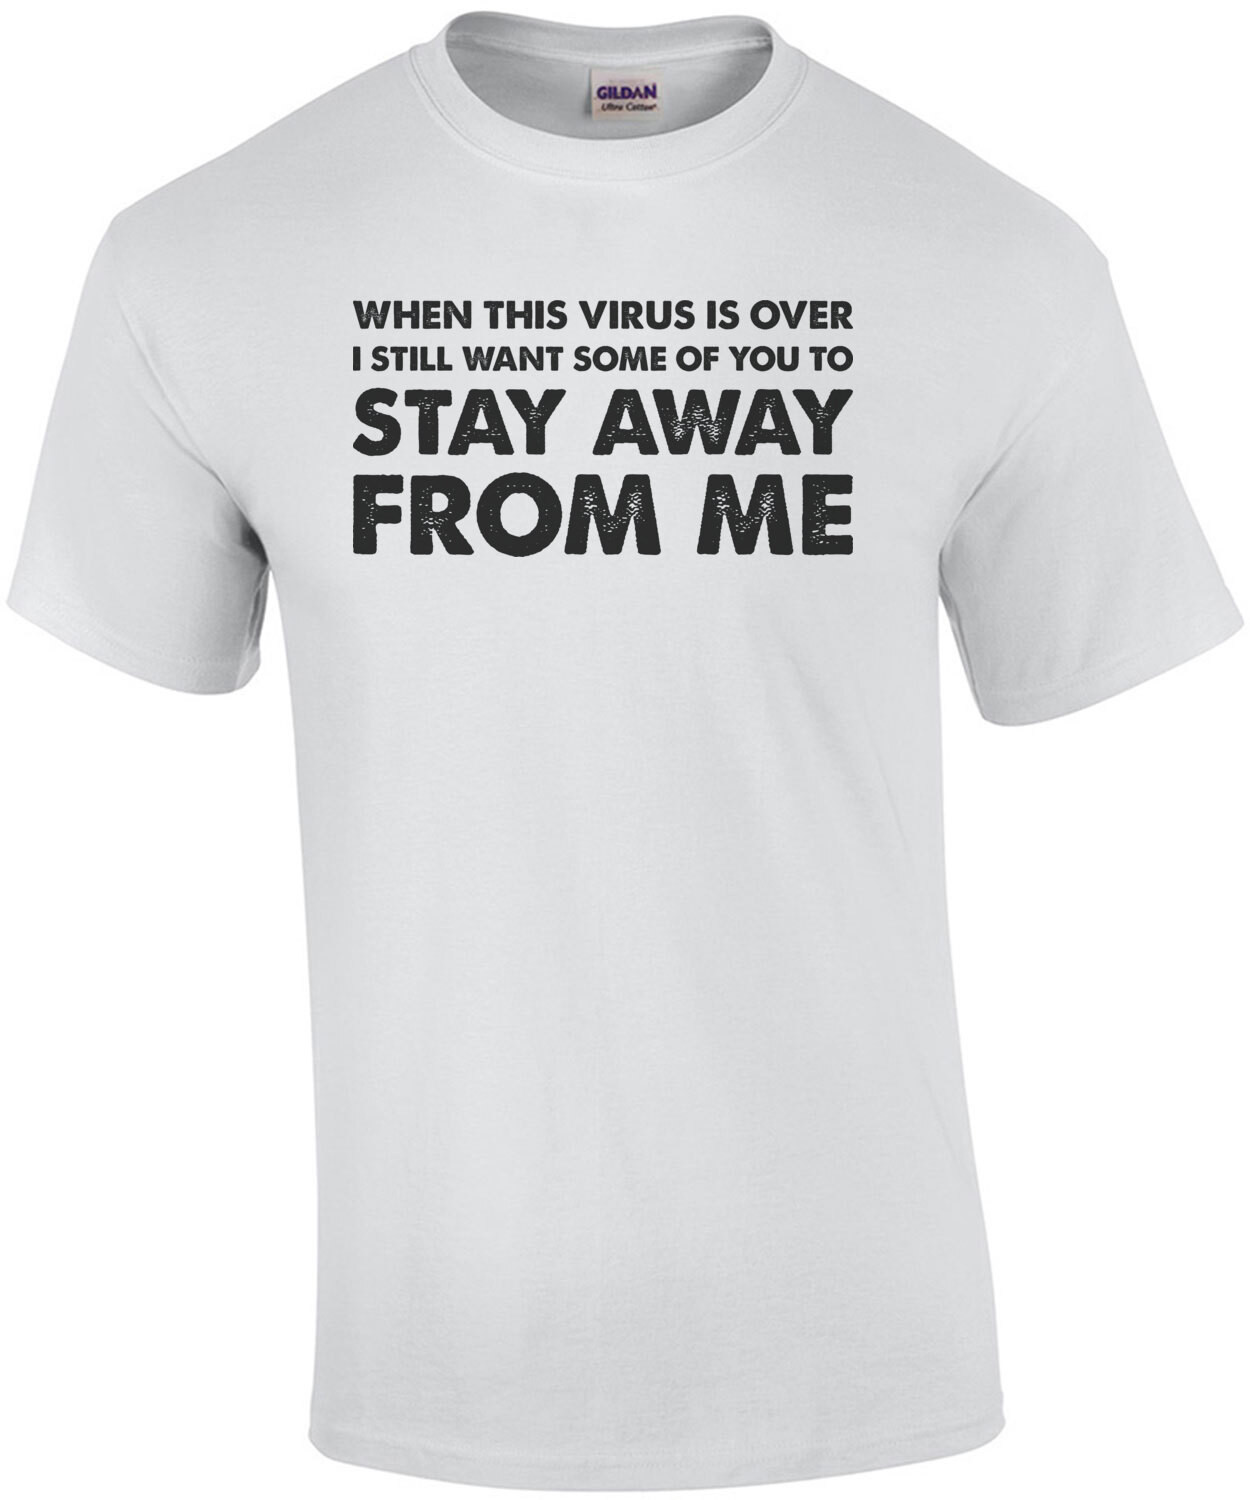 When this virus is over I still want some of you to stay away from me - funny covid-19 t-shirt